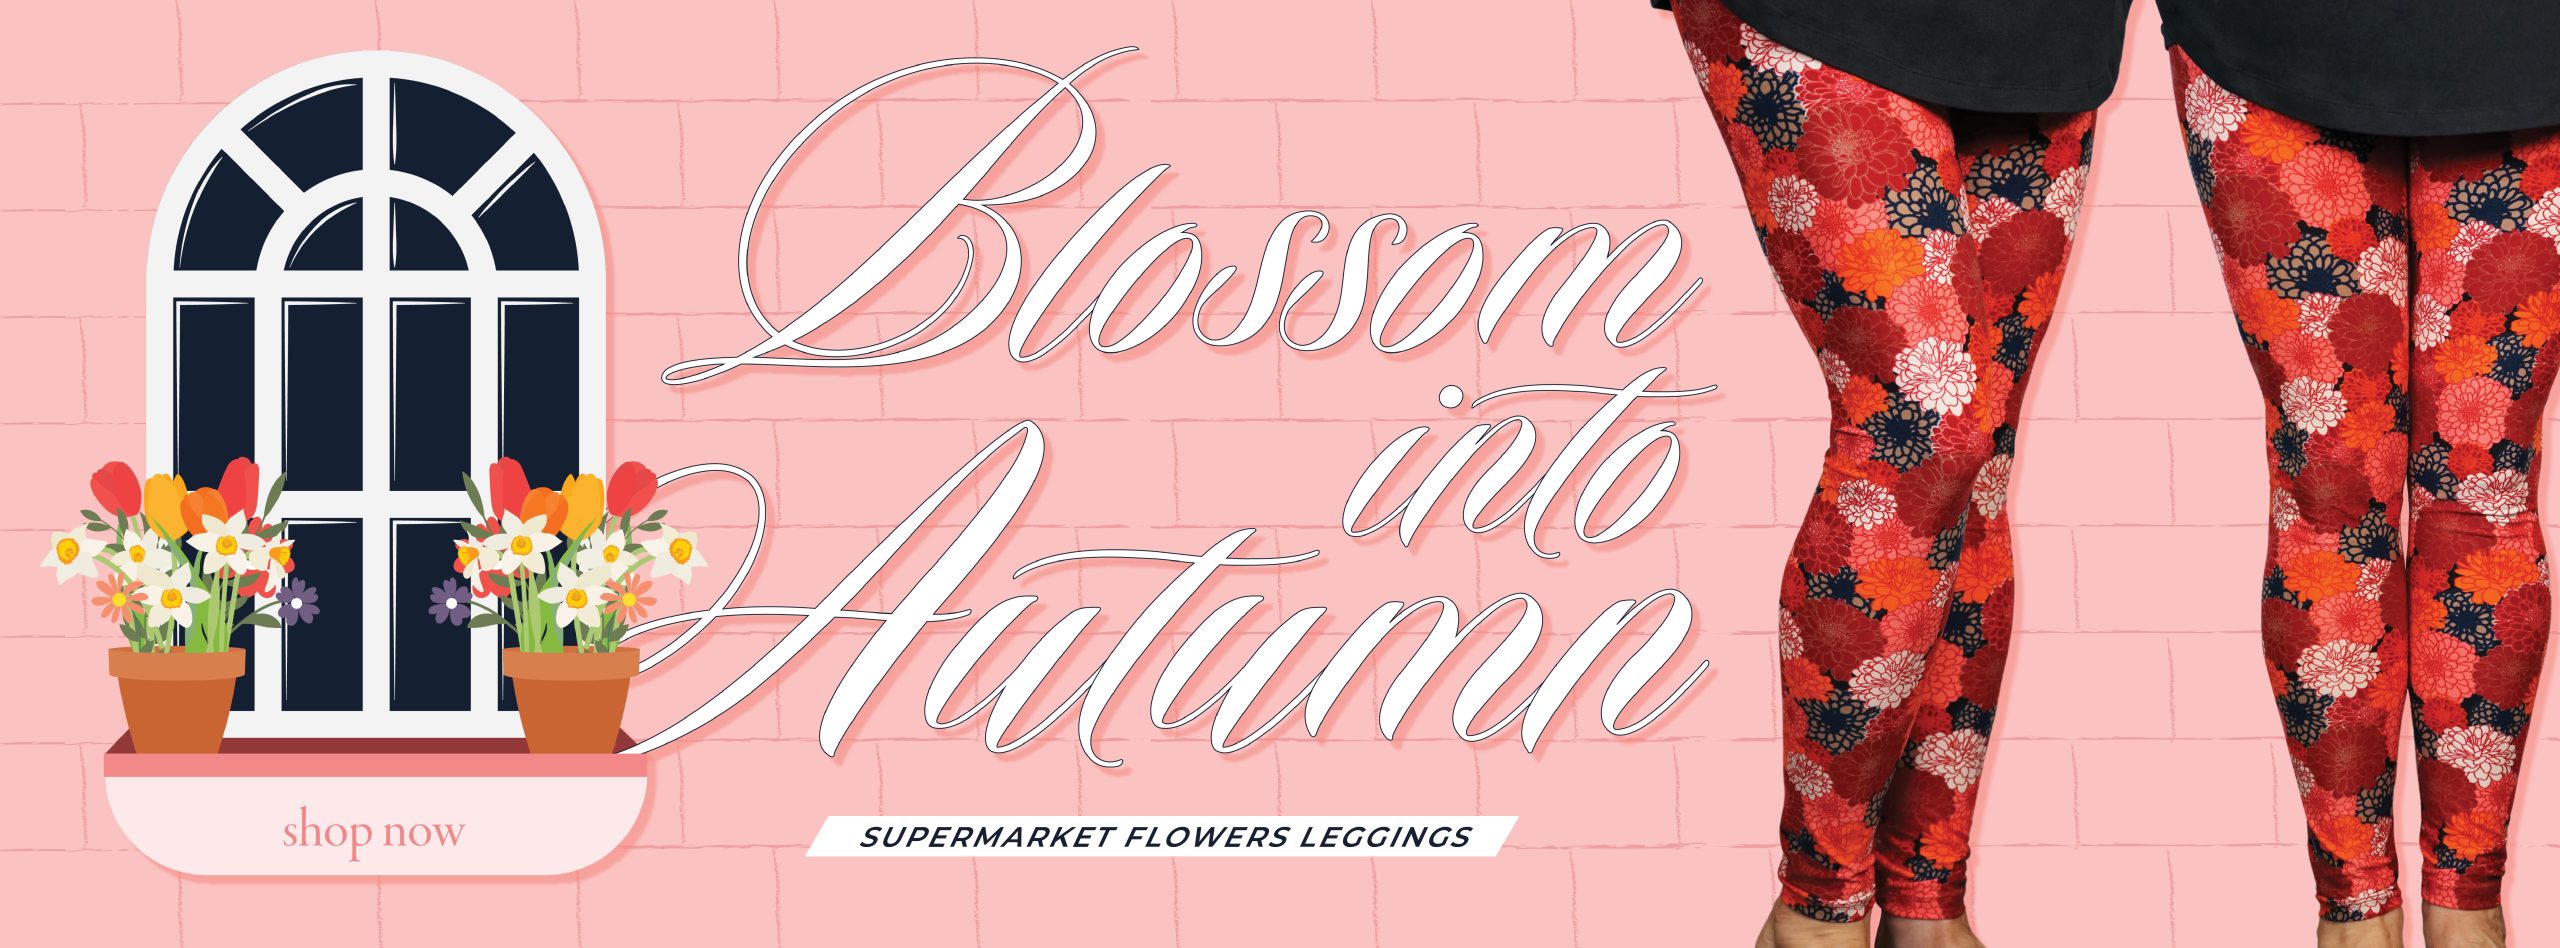 Banner that shows our new Supermarket Flowers Leggings. Text says "Blossom into Autumn" and "Shop Now"